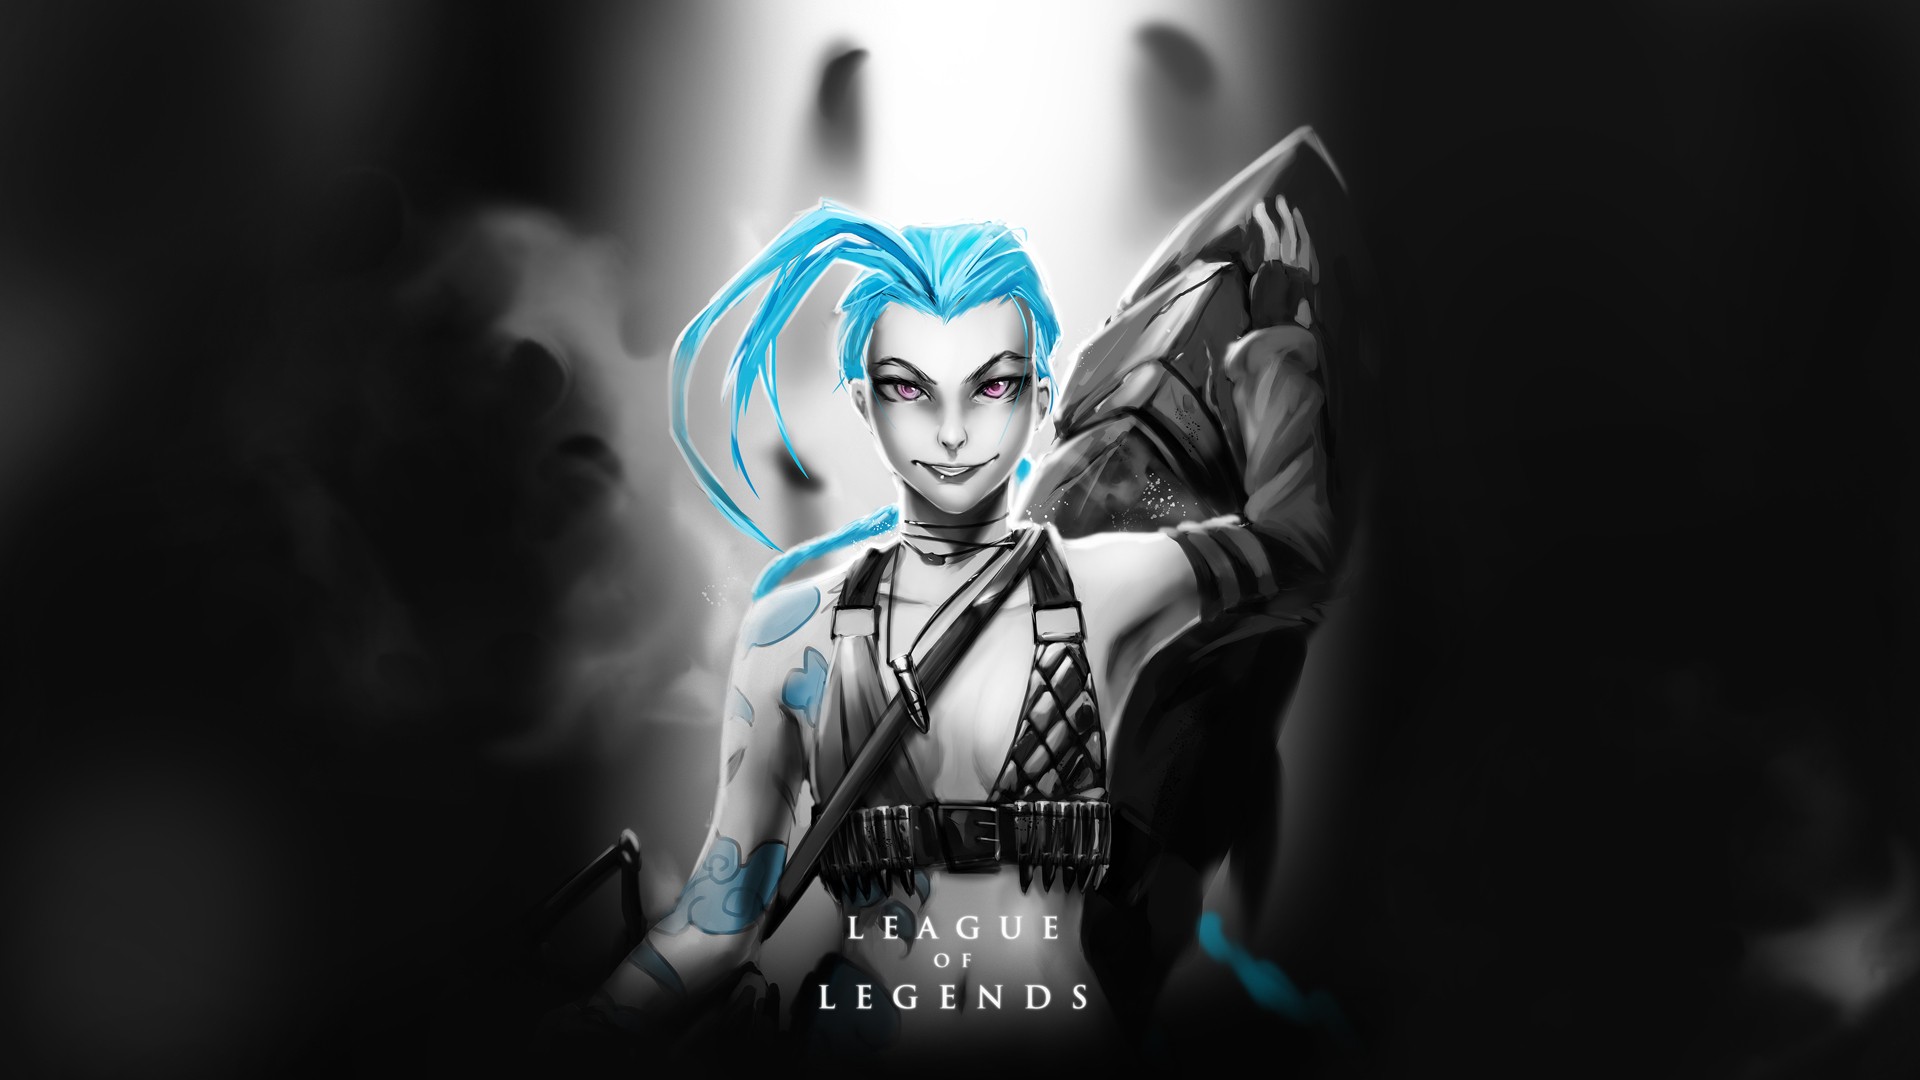 General 1920x1080 Jinx (League of Legends) League of Legends blue hair video game characters video game girls cyan hair selective coloring PC gaming